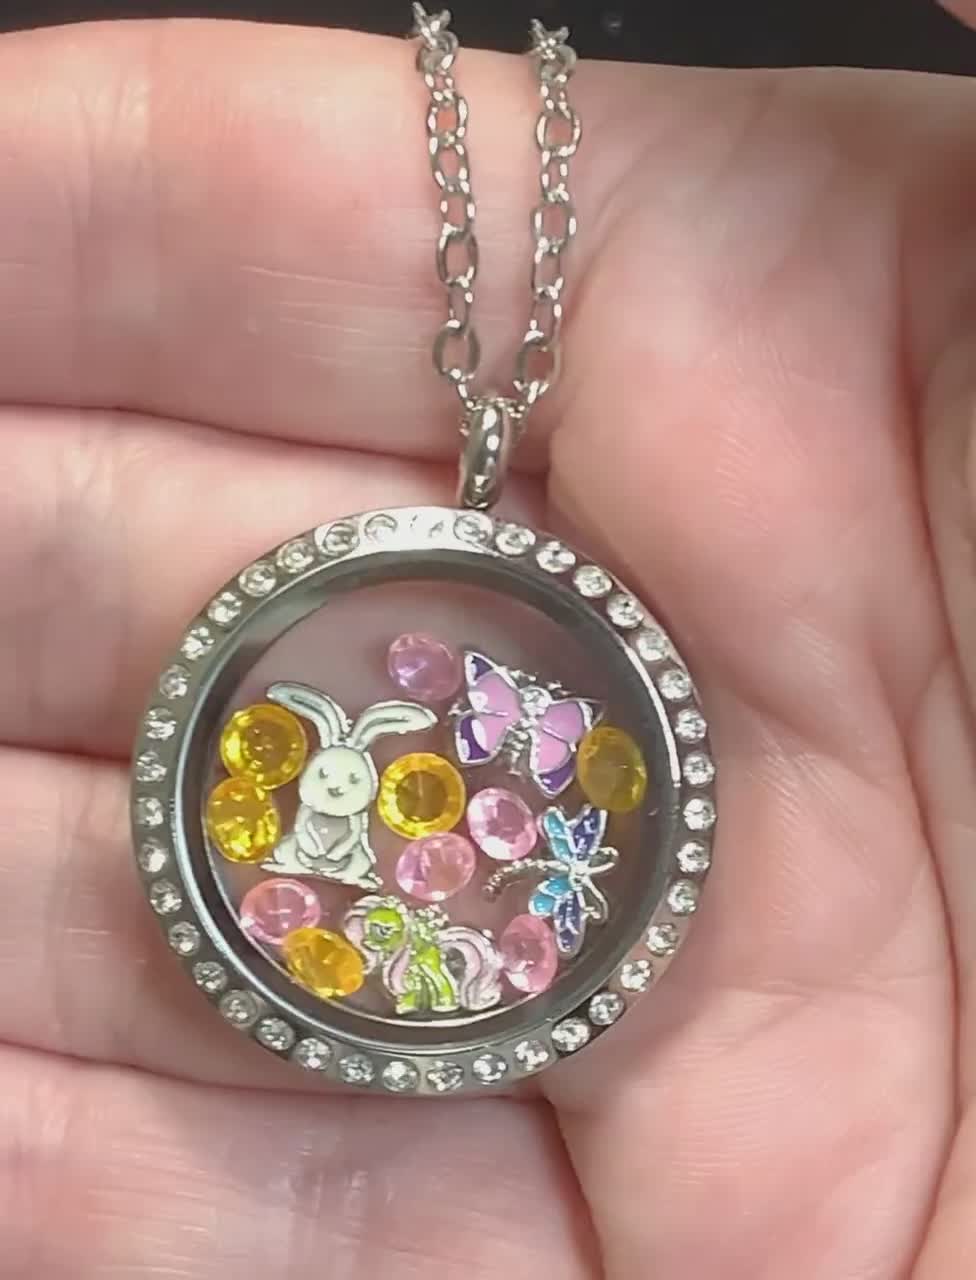 Badge Reel Charm Locket With BACK Clip 